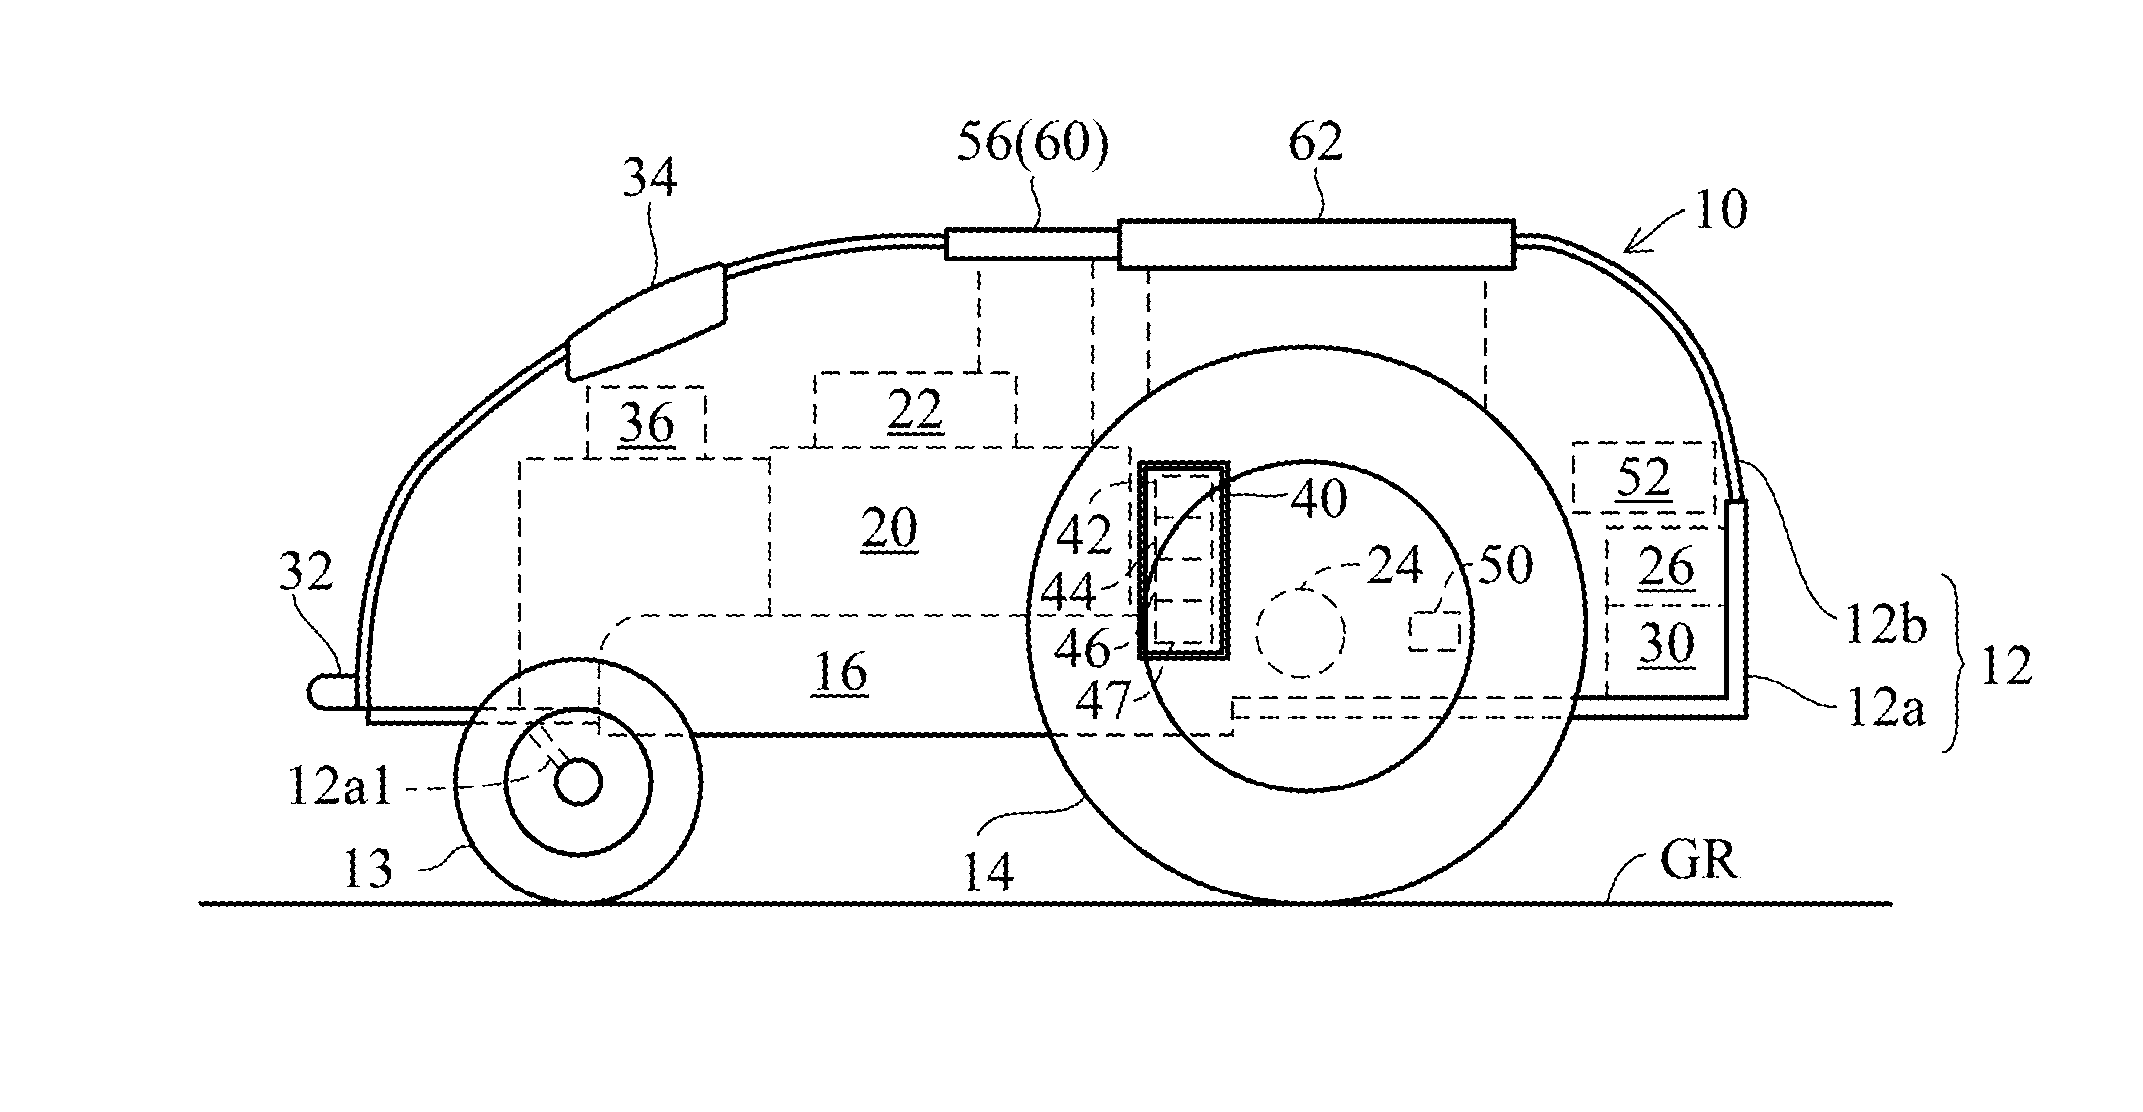 Apparatus for controlling autonomously navigating utility vehicle